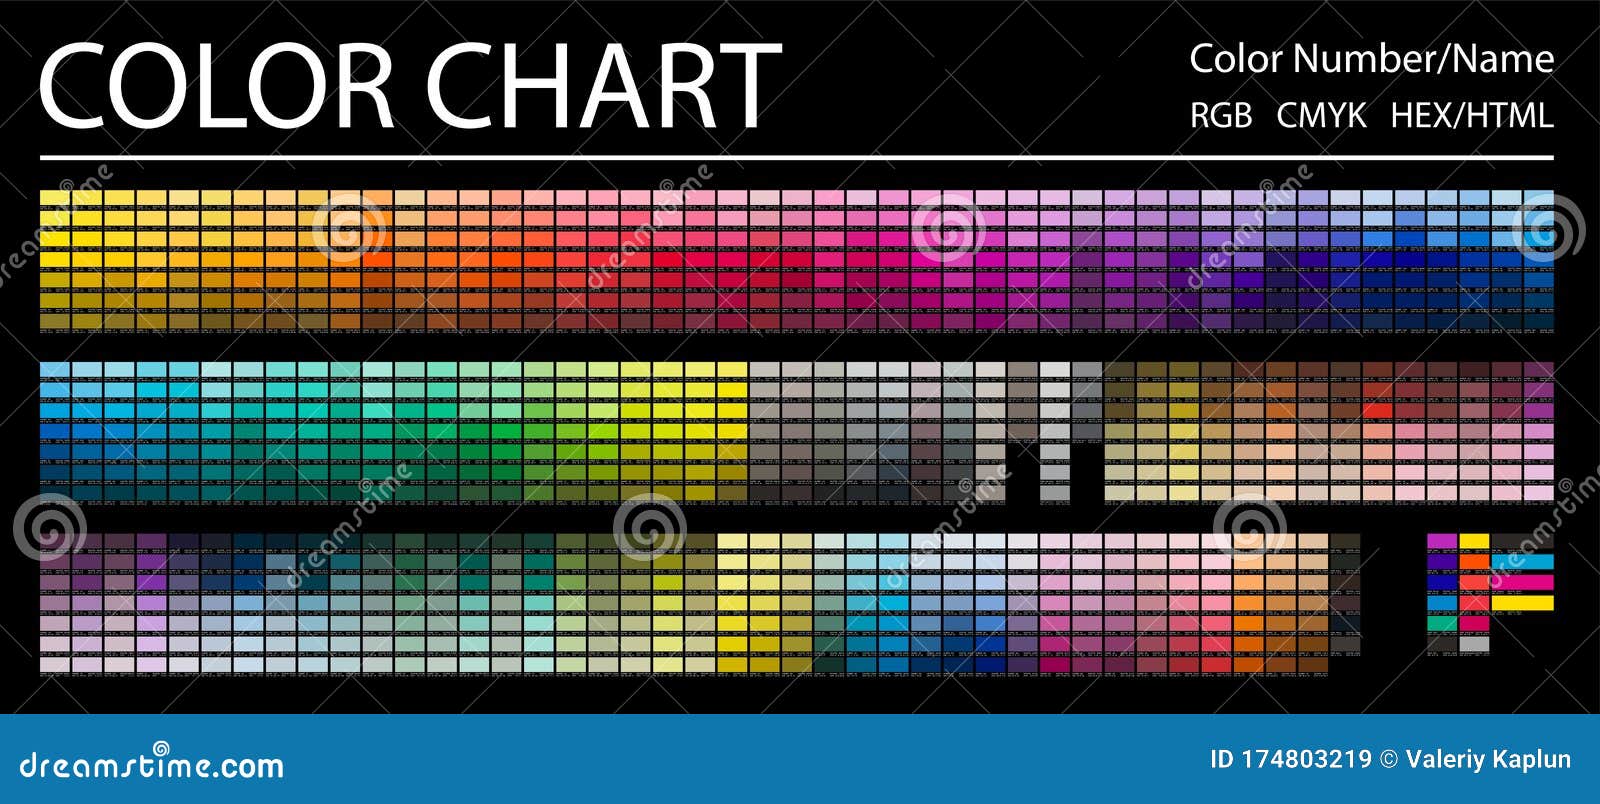 color chart. print test page. color numbers or names. rgb, cmyk, hex html codes.  color palette